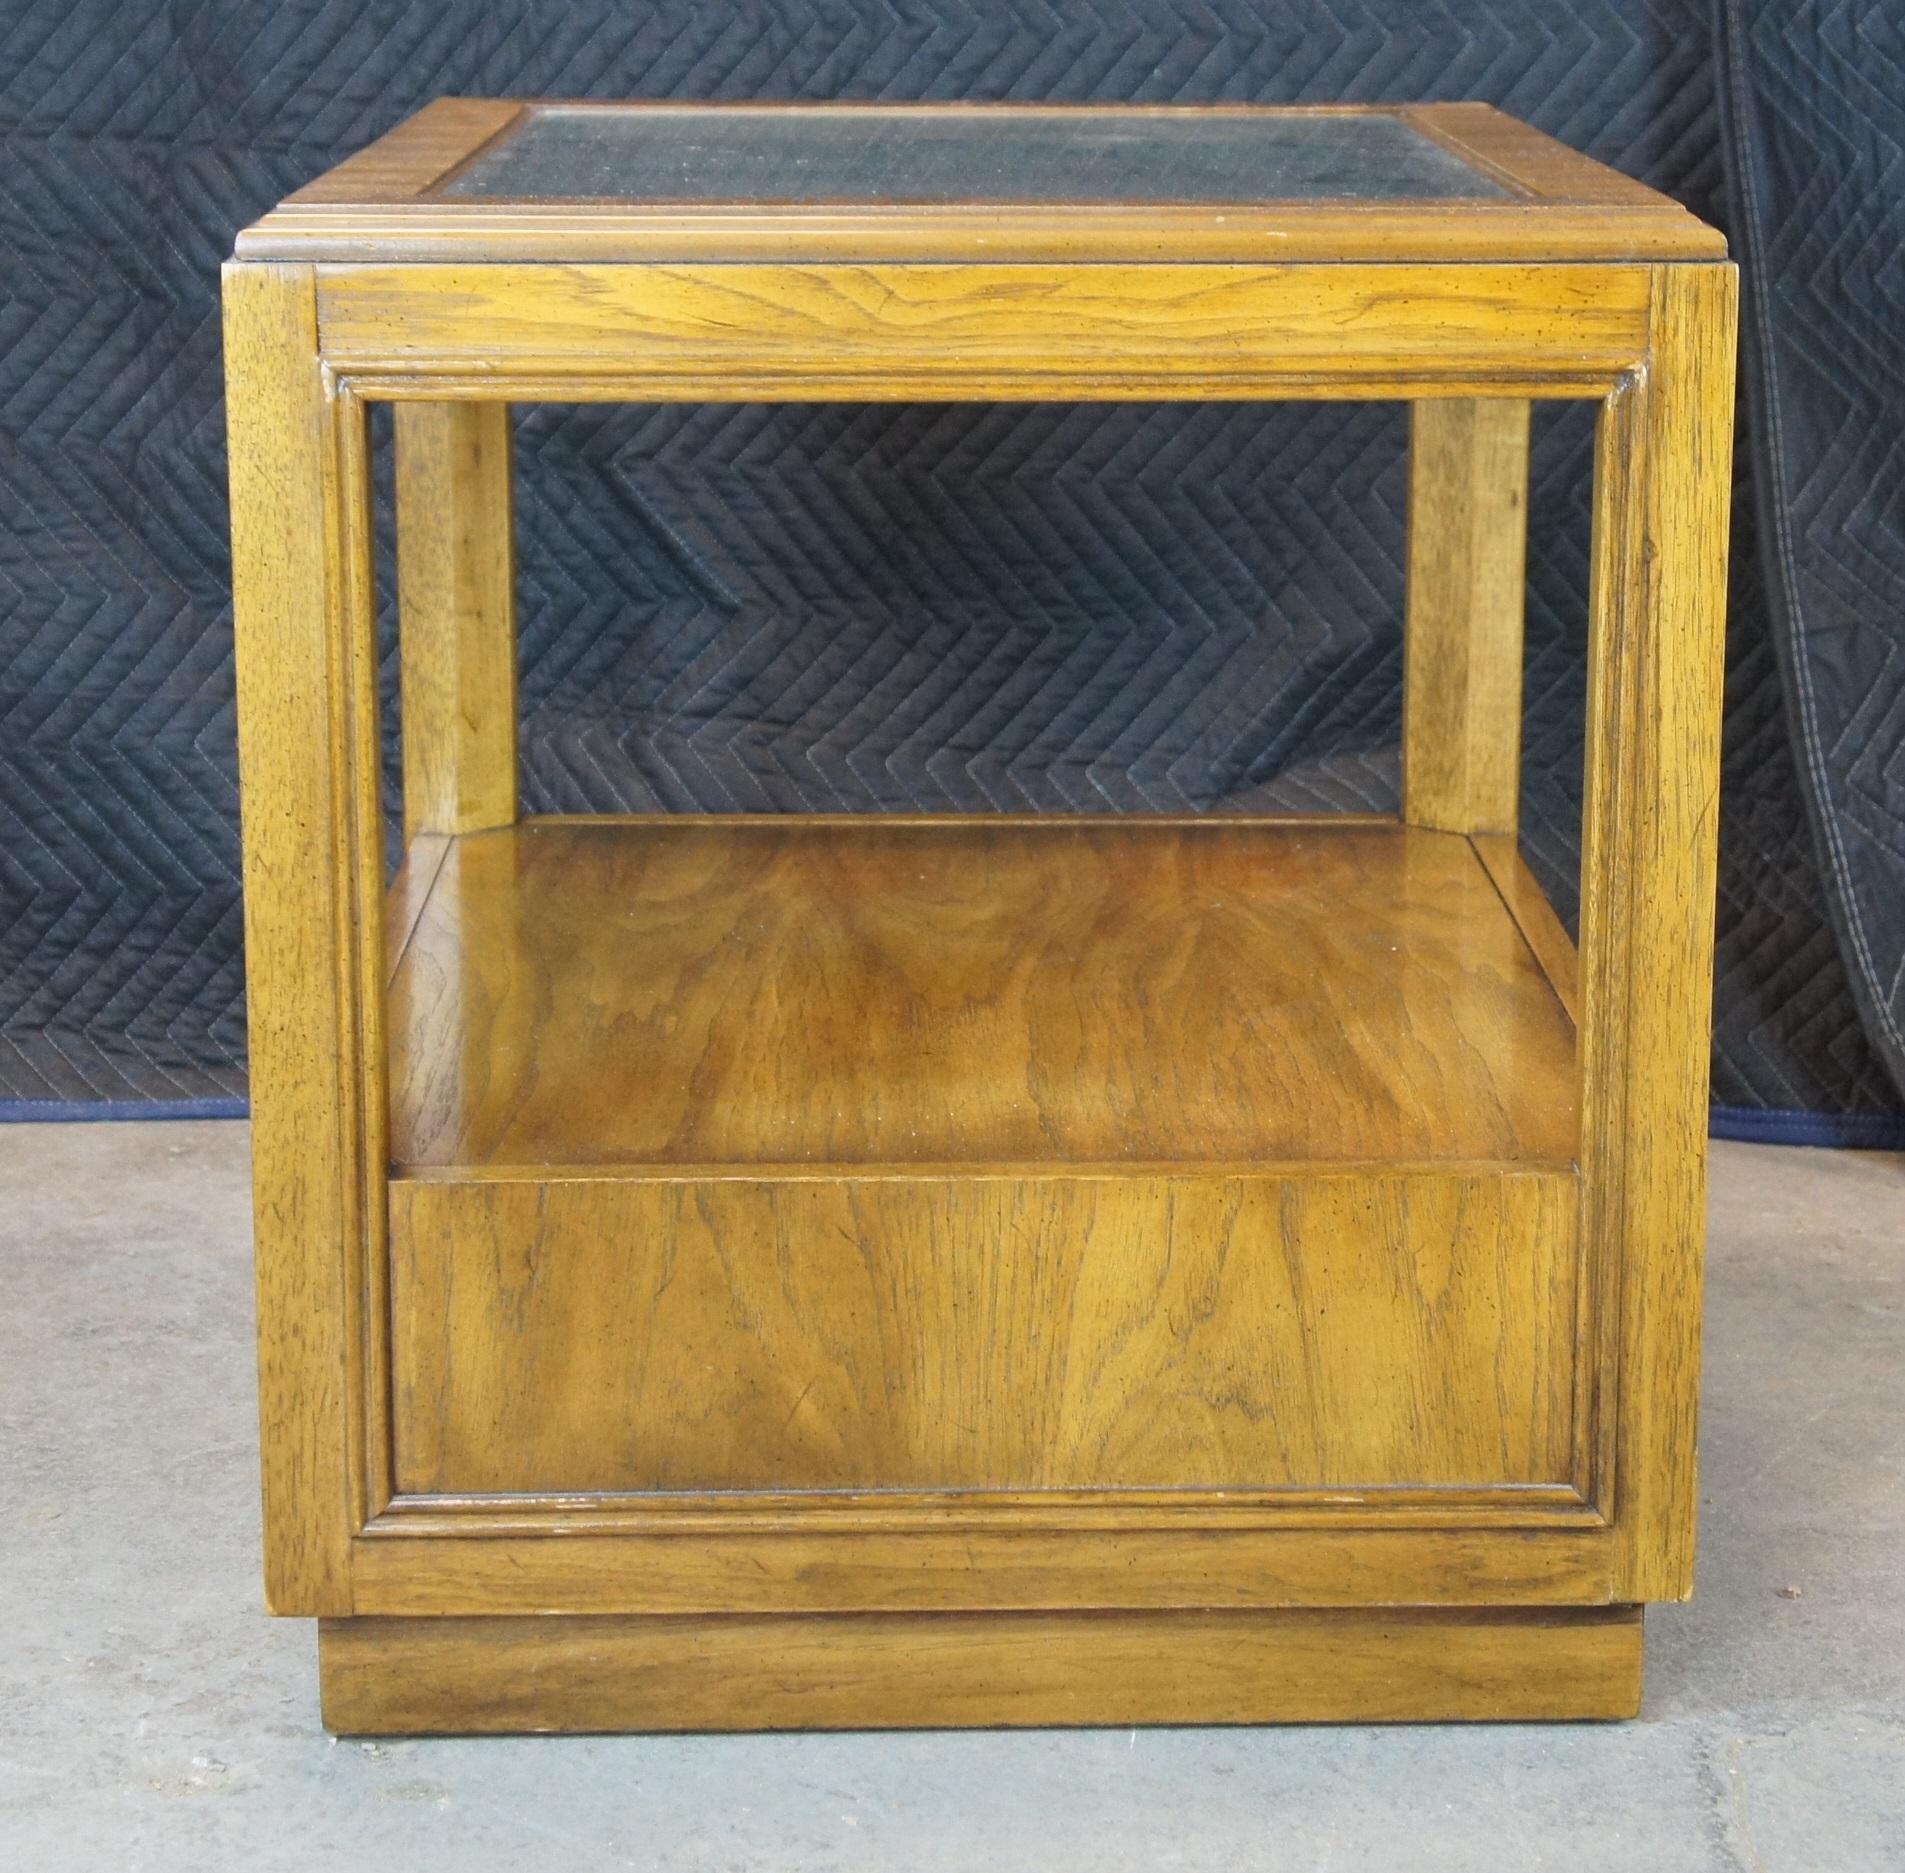 1979 Drexel Heritage Accolade II Walnut Glass 2 Tier Campaign Side Table 984-330 7